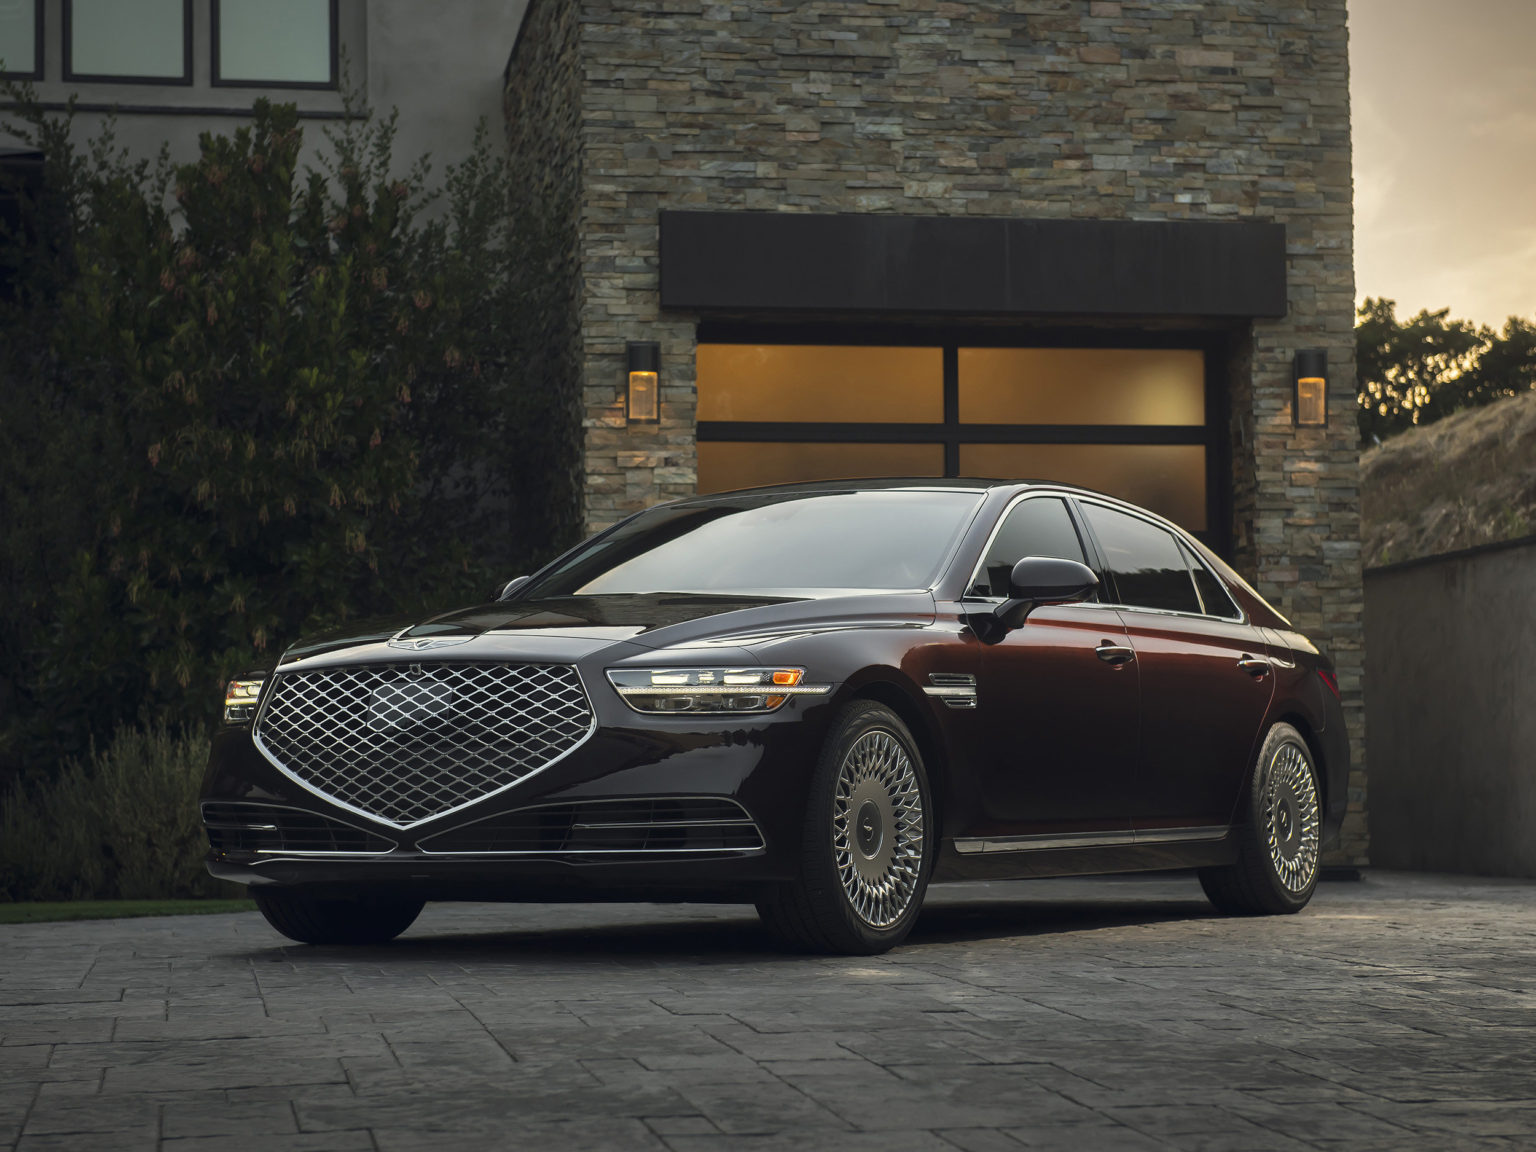 The Genesis G90 has gotten a fresh face and interior enhancementns for the 2020 model year.